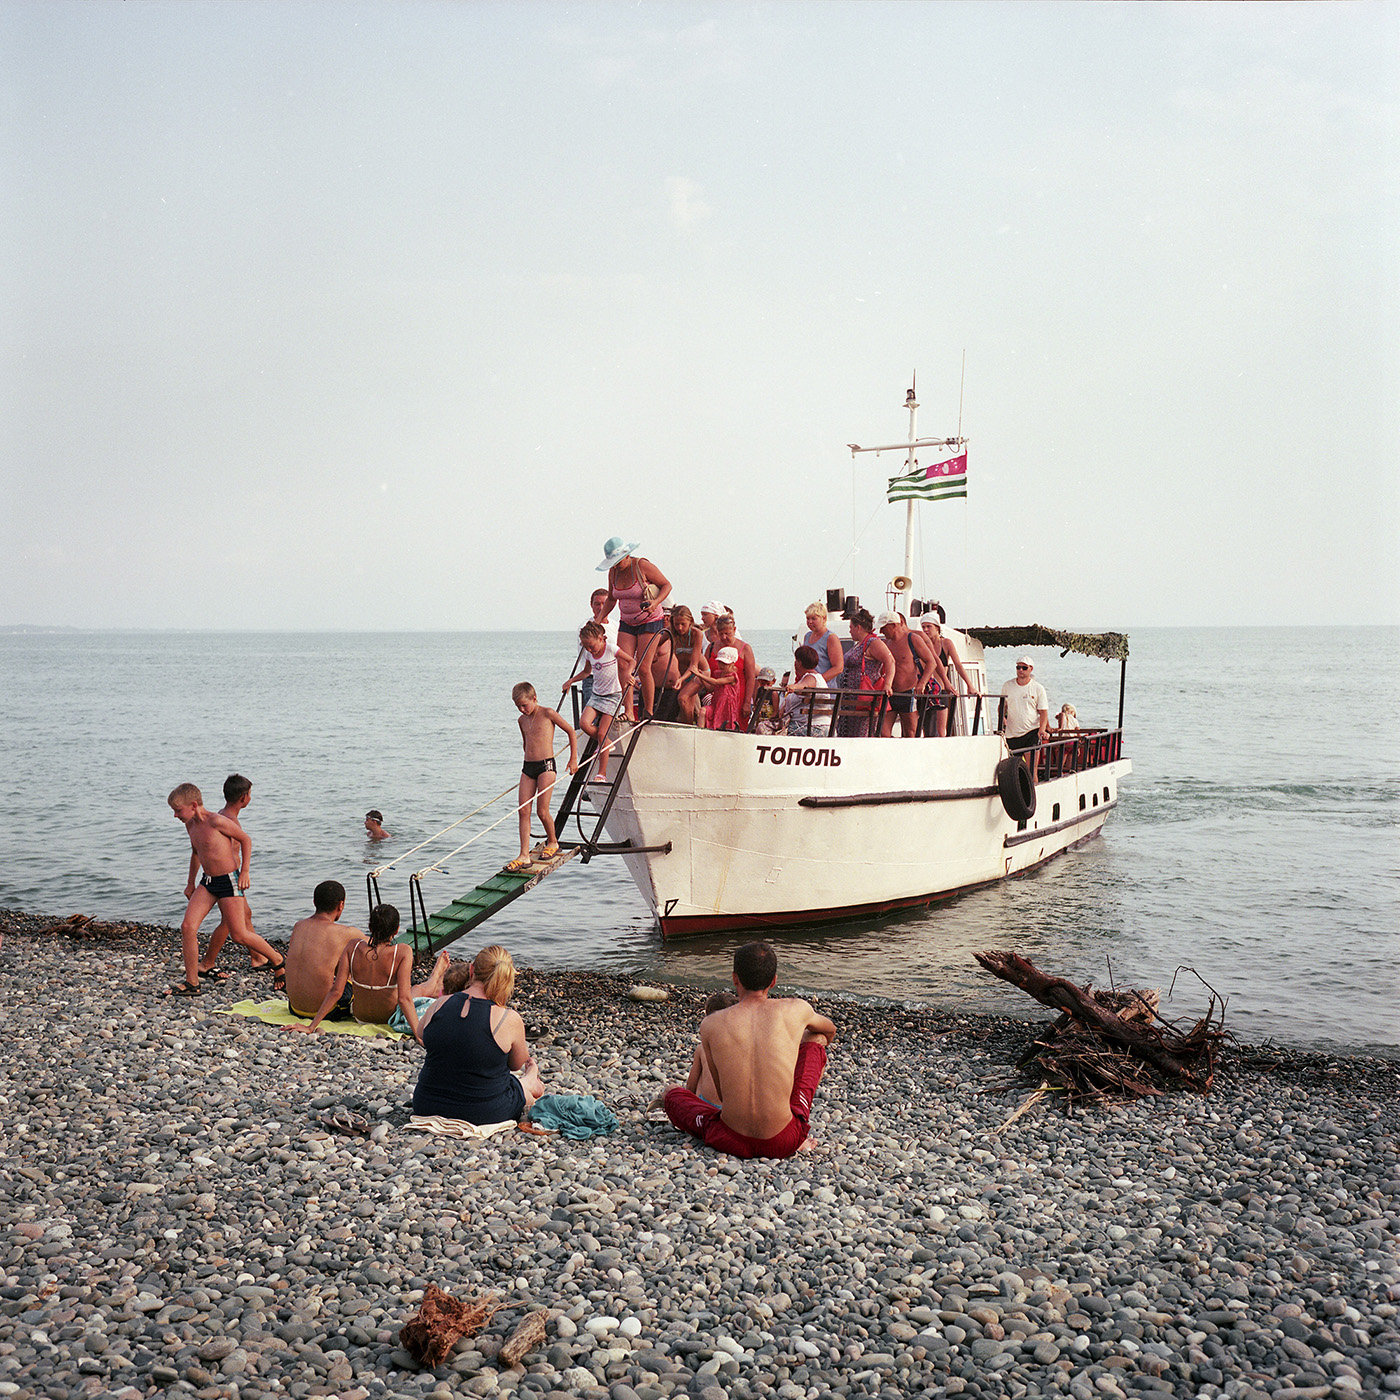  On the beach in Gagra. A boat comes take the tourists for an hour trip. The boat's captain was working on large fishing vessels in the past. Today, he renovated this boat and works for tourists. 